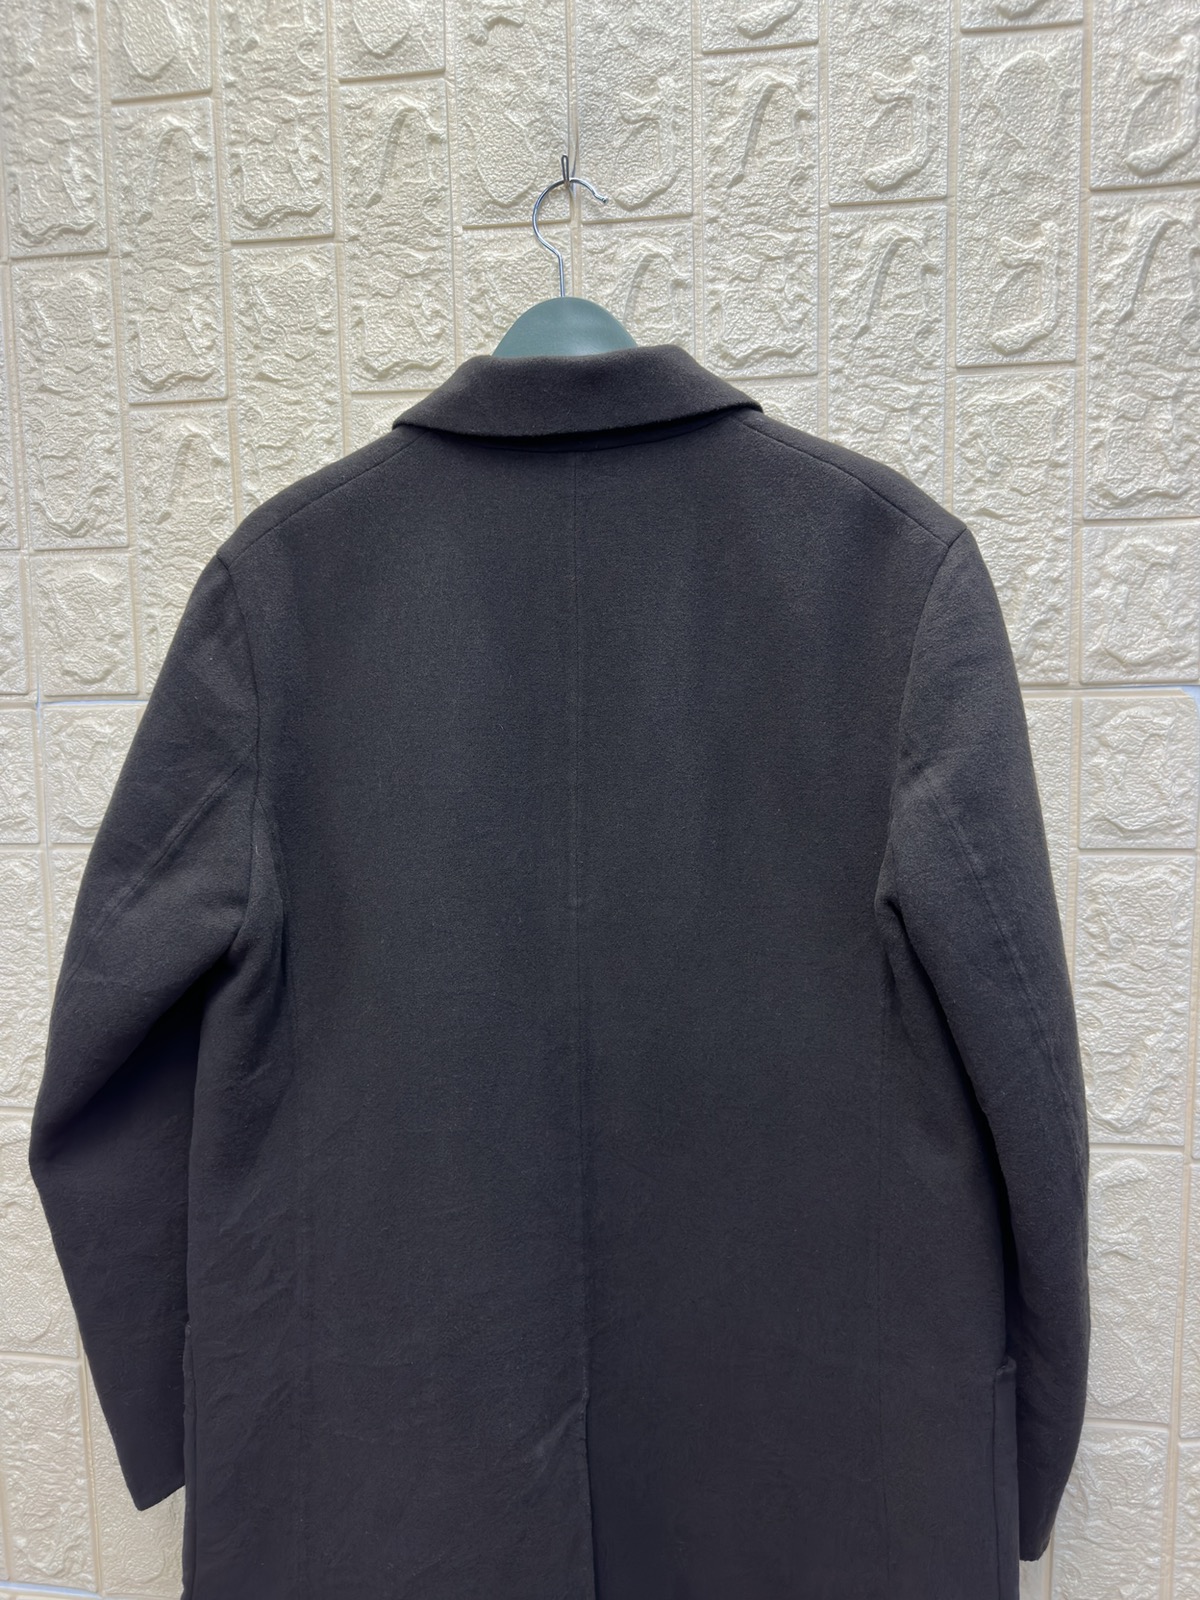 Undercover X Uniqlo Wool Trench Coat-GR97 - 5